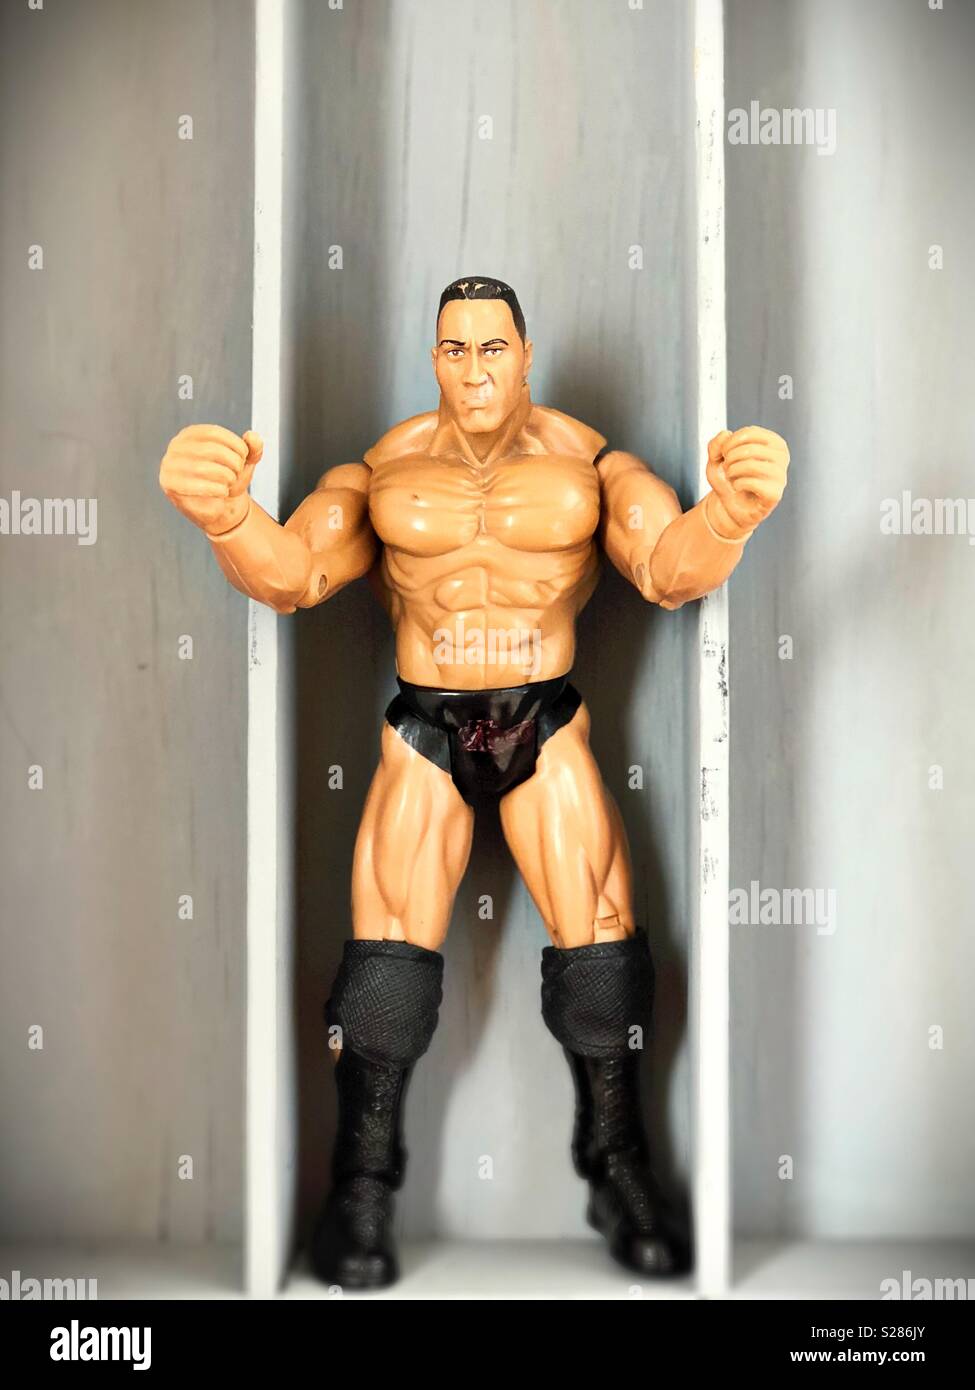 A very muscular action figure. Stock Photo